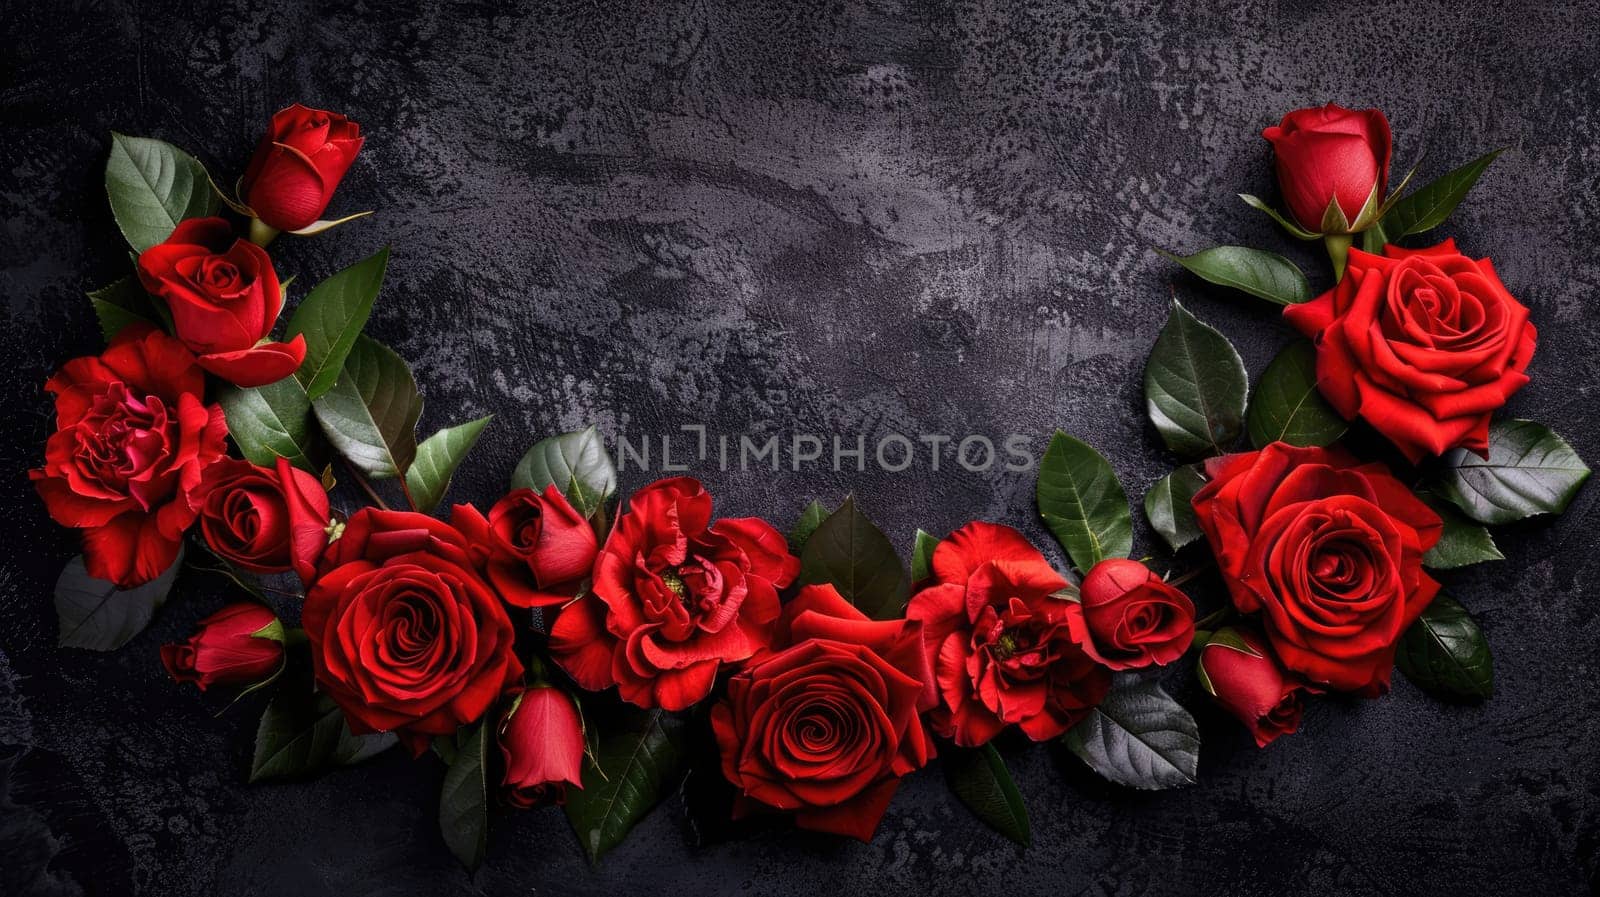 A bouquet of red hybrid tea roses with green leaves against a black backdrop AI